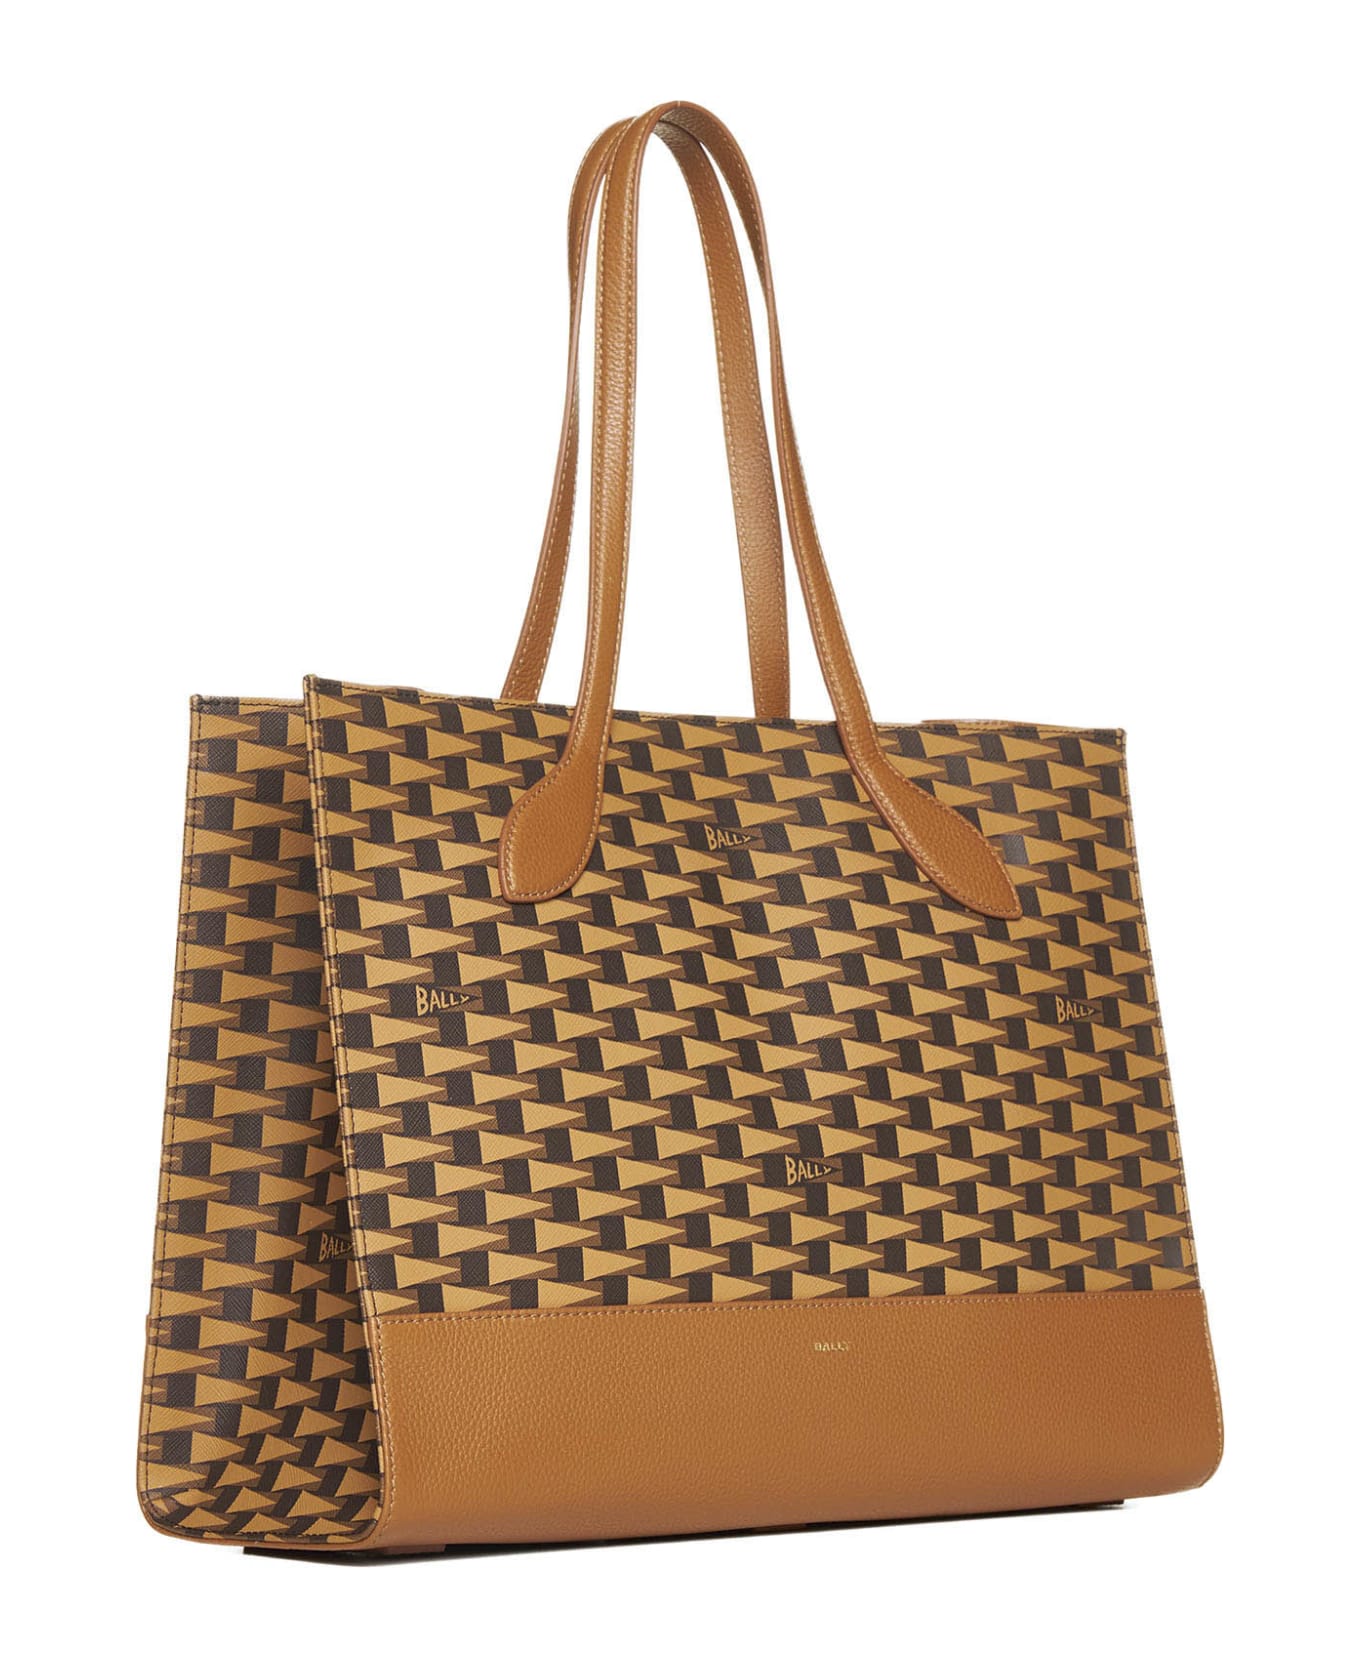 Bally Pennant Tote Bag - Beige トートバッグ